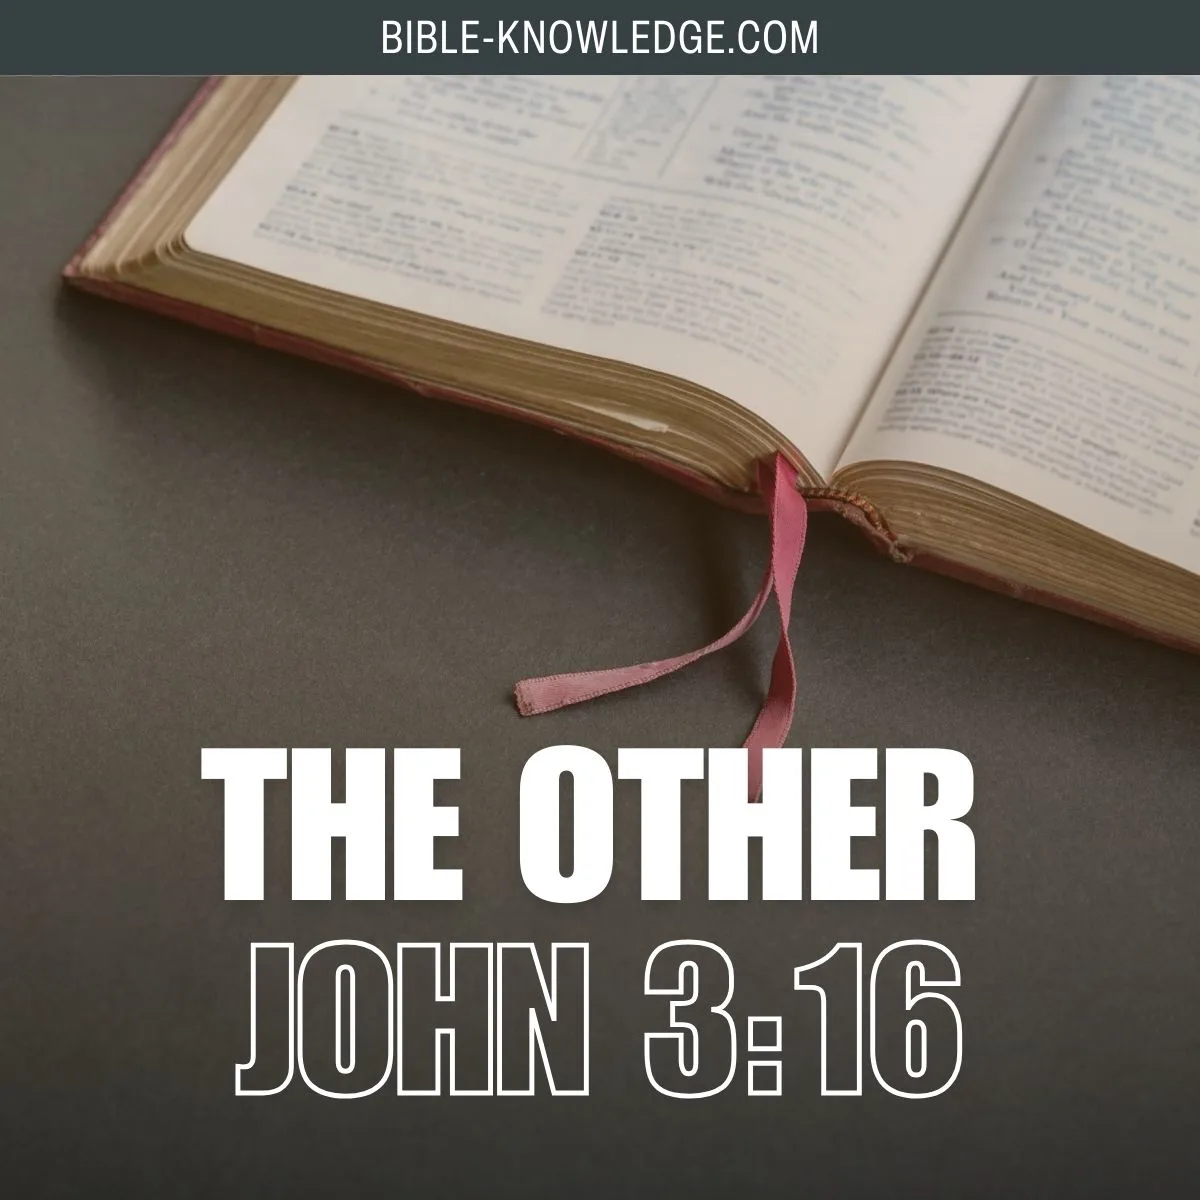 The Other John 3:16